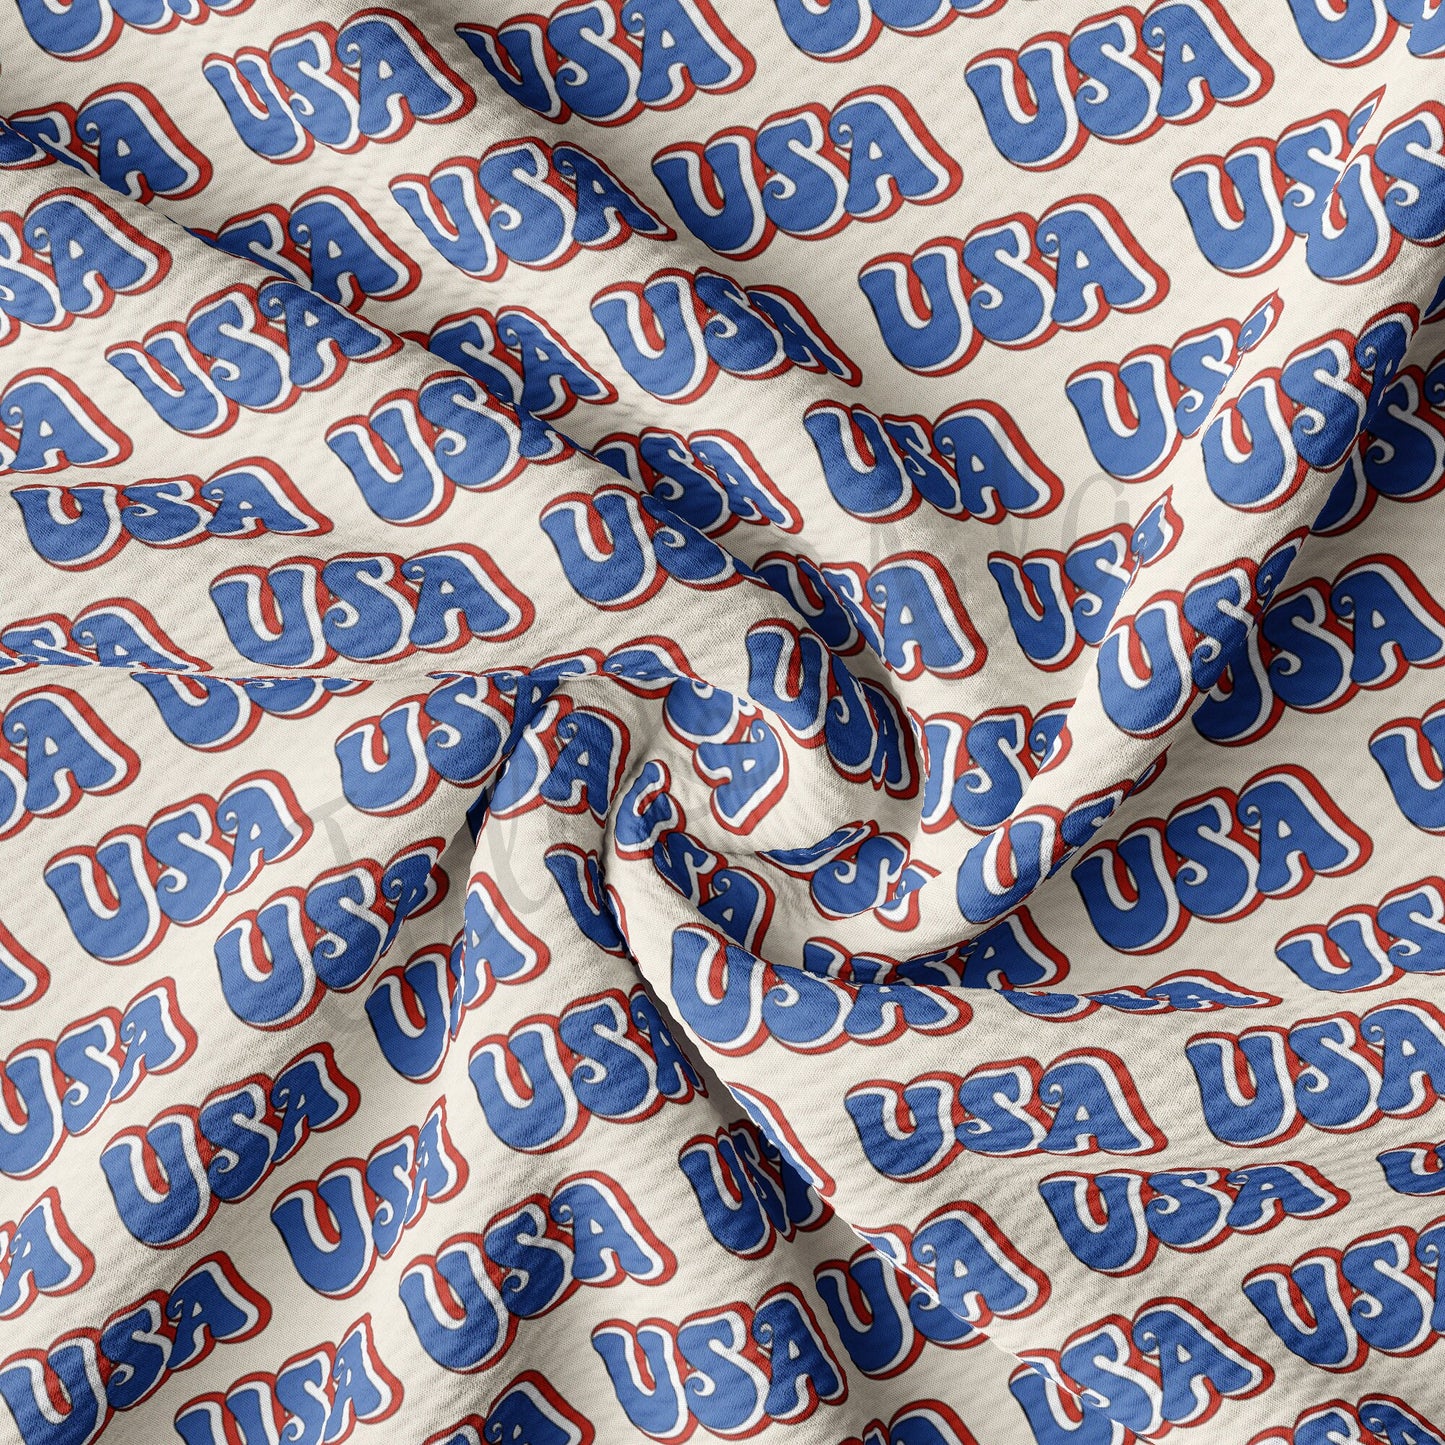 Patriotic 4th of July Bullet Fabric AA367